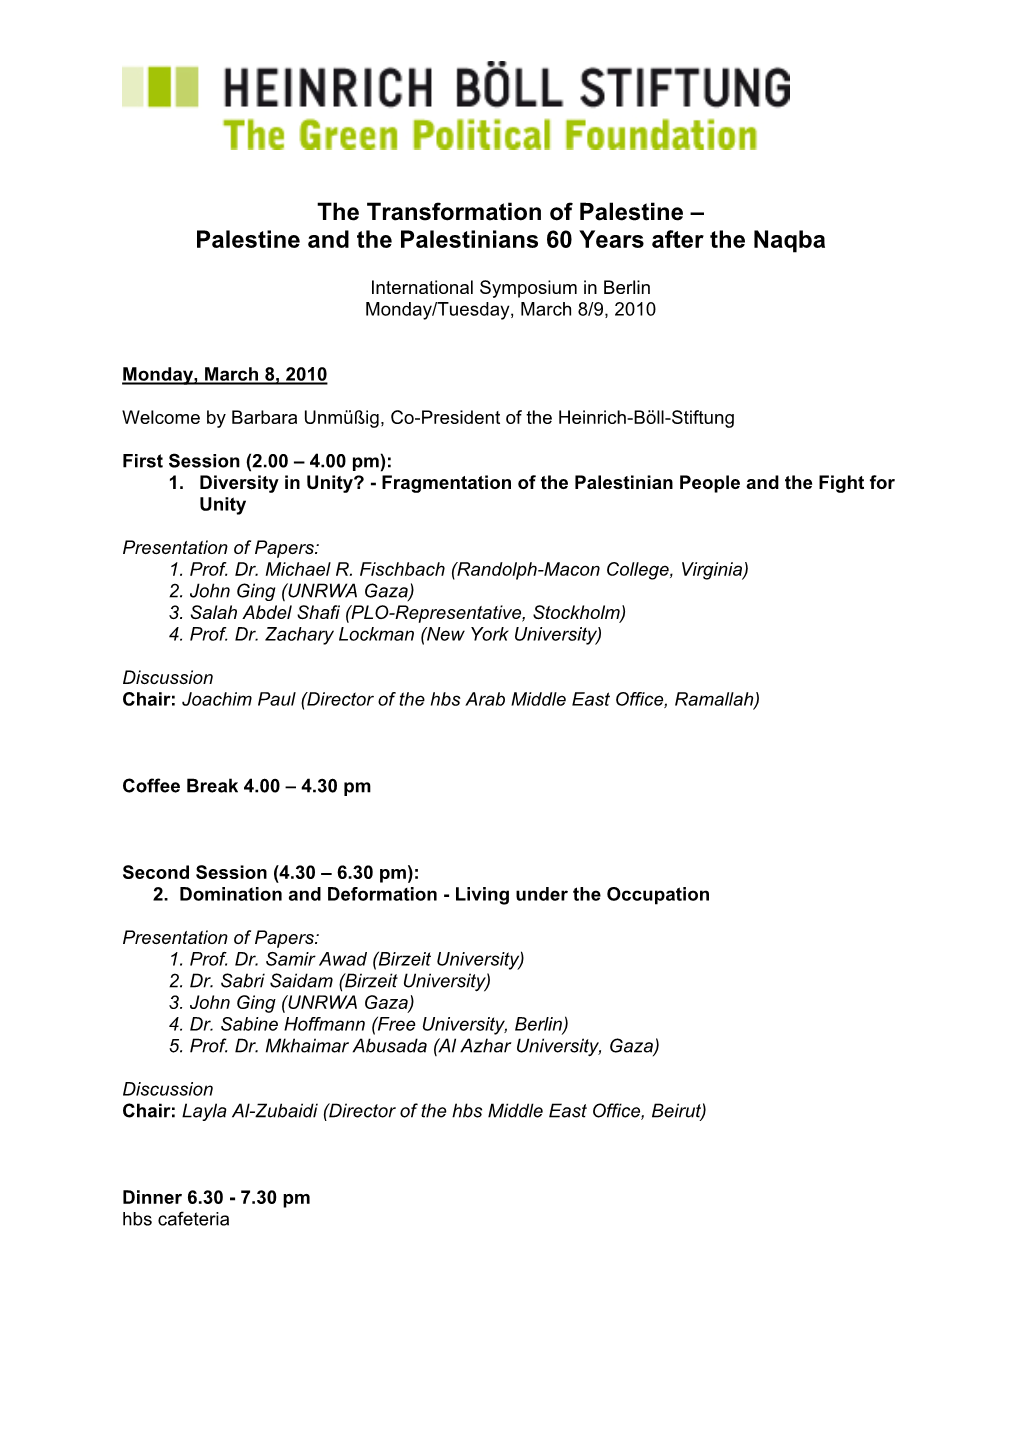 The Transformation of Palestine – Palestine and the Palestinians 60 Years After the Naqba